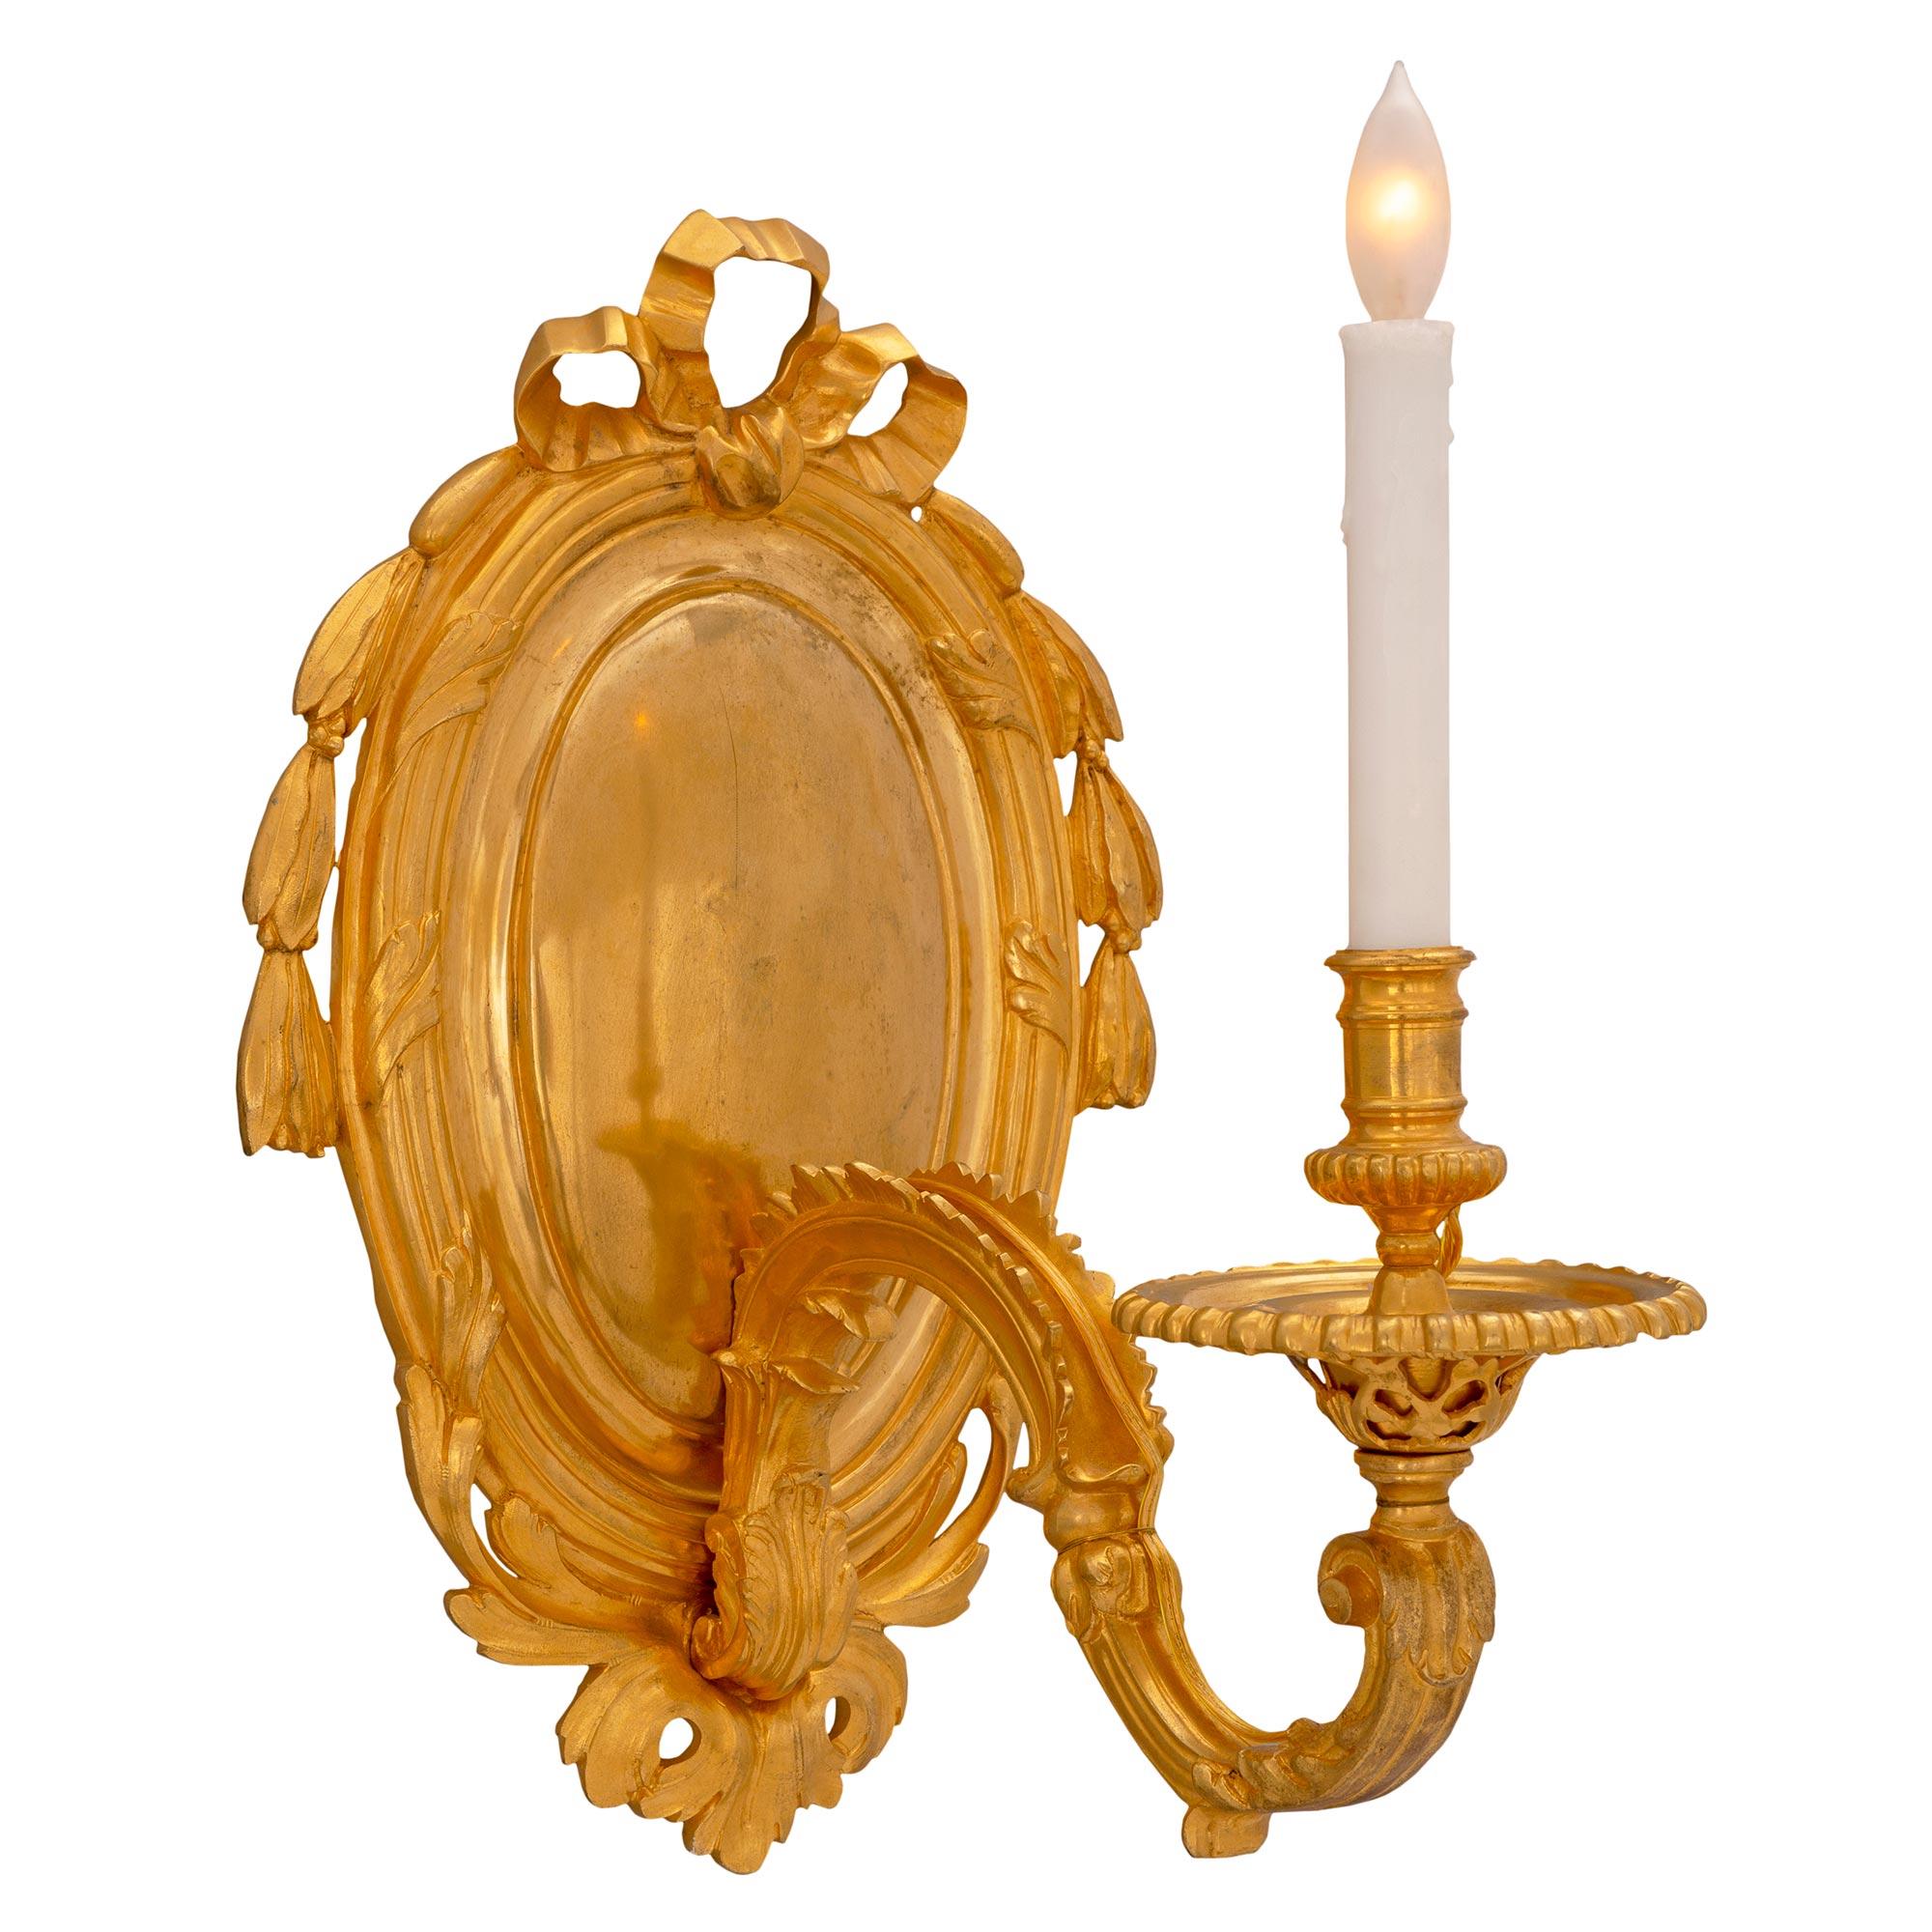 A most attractive pair of French 19th century Louis XVI st. ormolu sconces. Each sconce displays an oval backplate, decorated laurel garlands centered by a bow at the top, and pierced acanthus leaves at the base. Each of the scrolled acanthus leaf